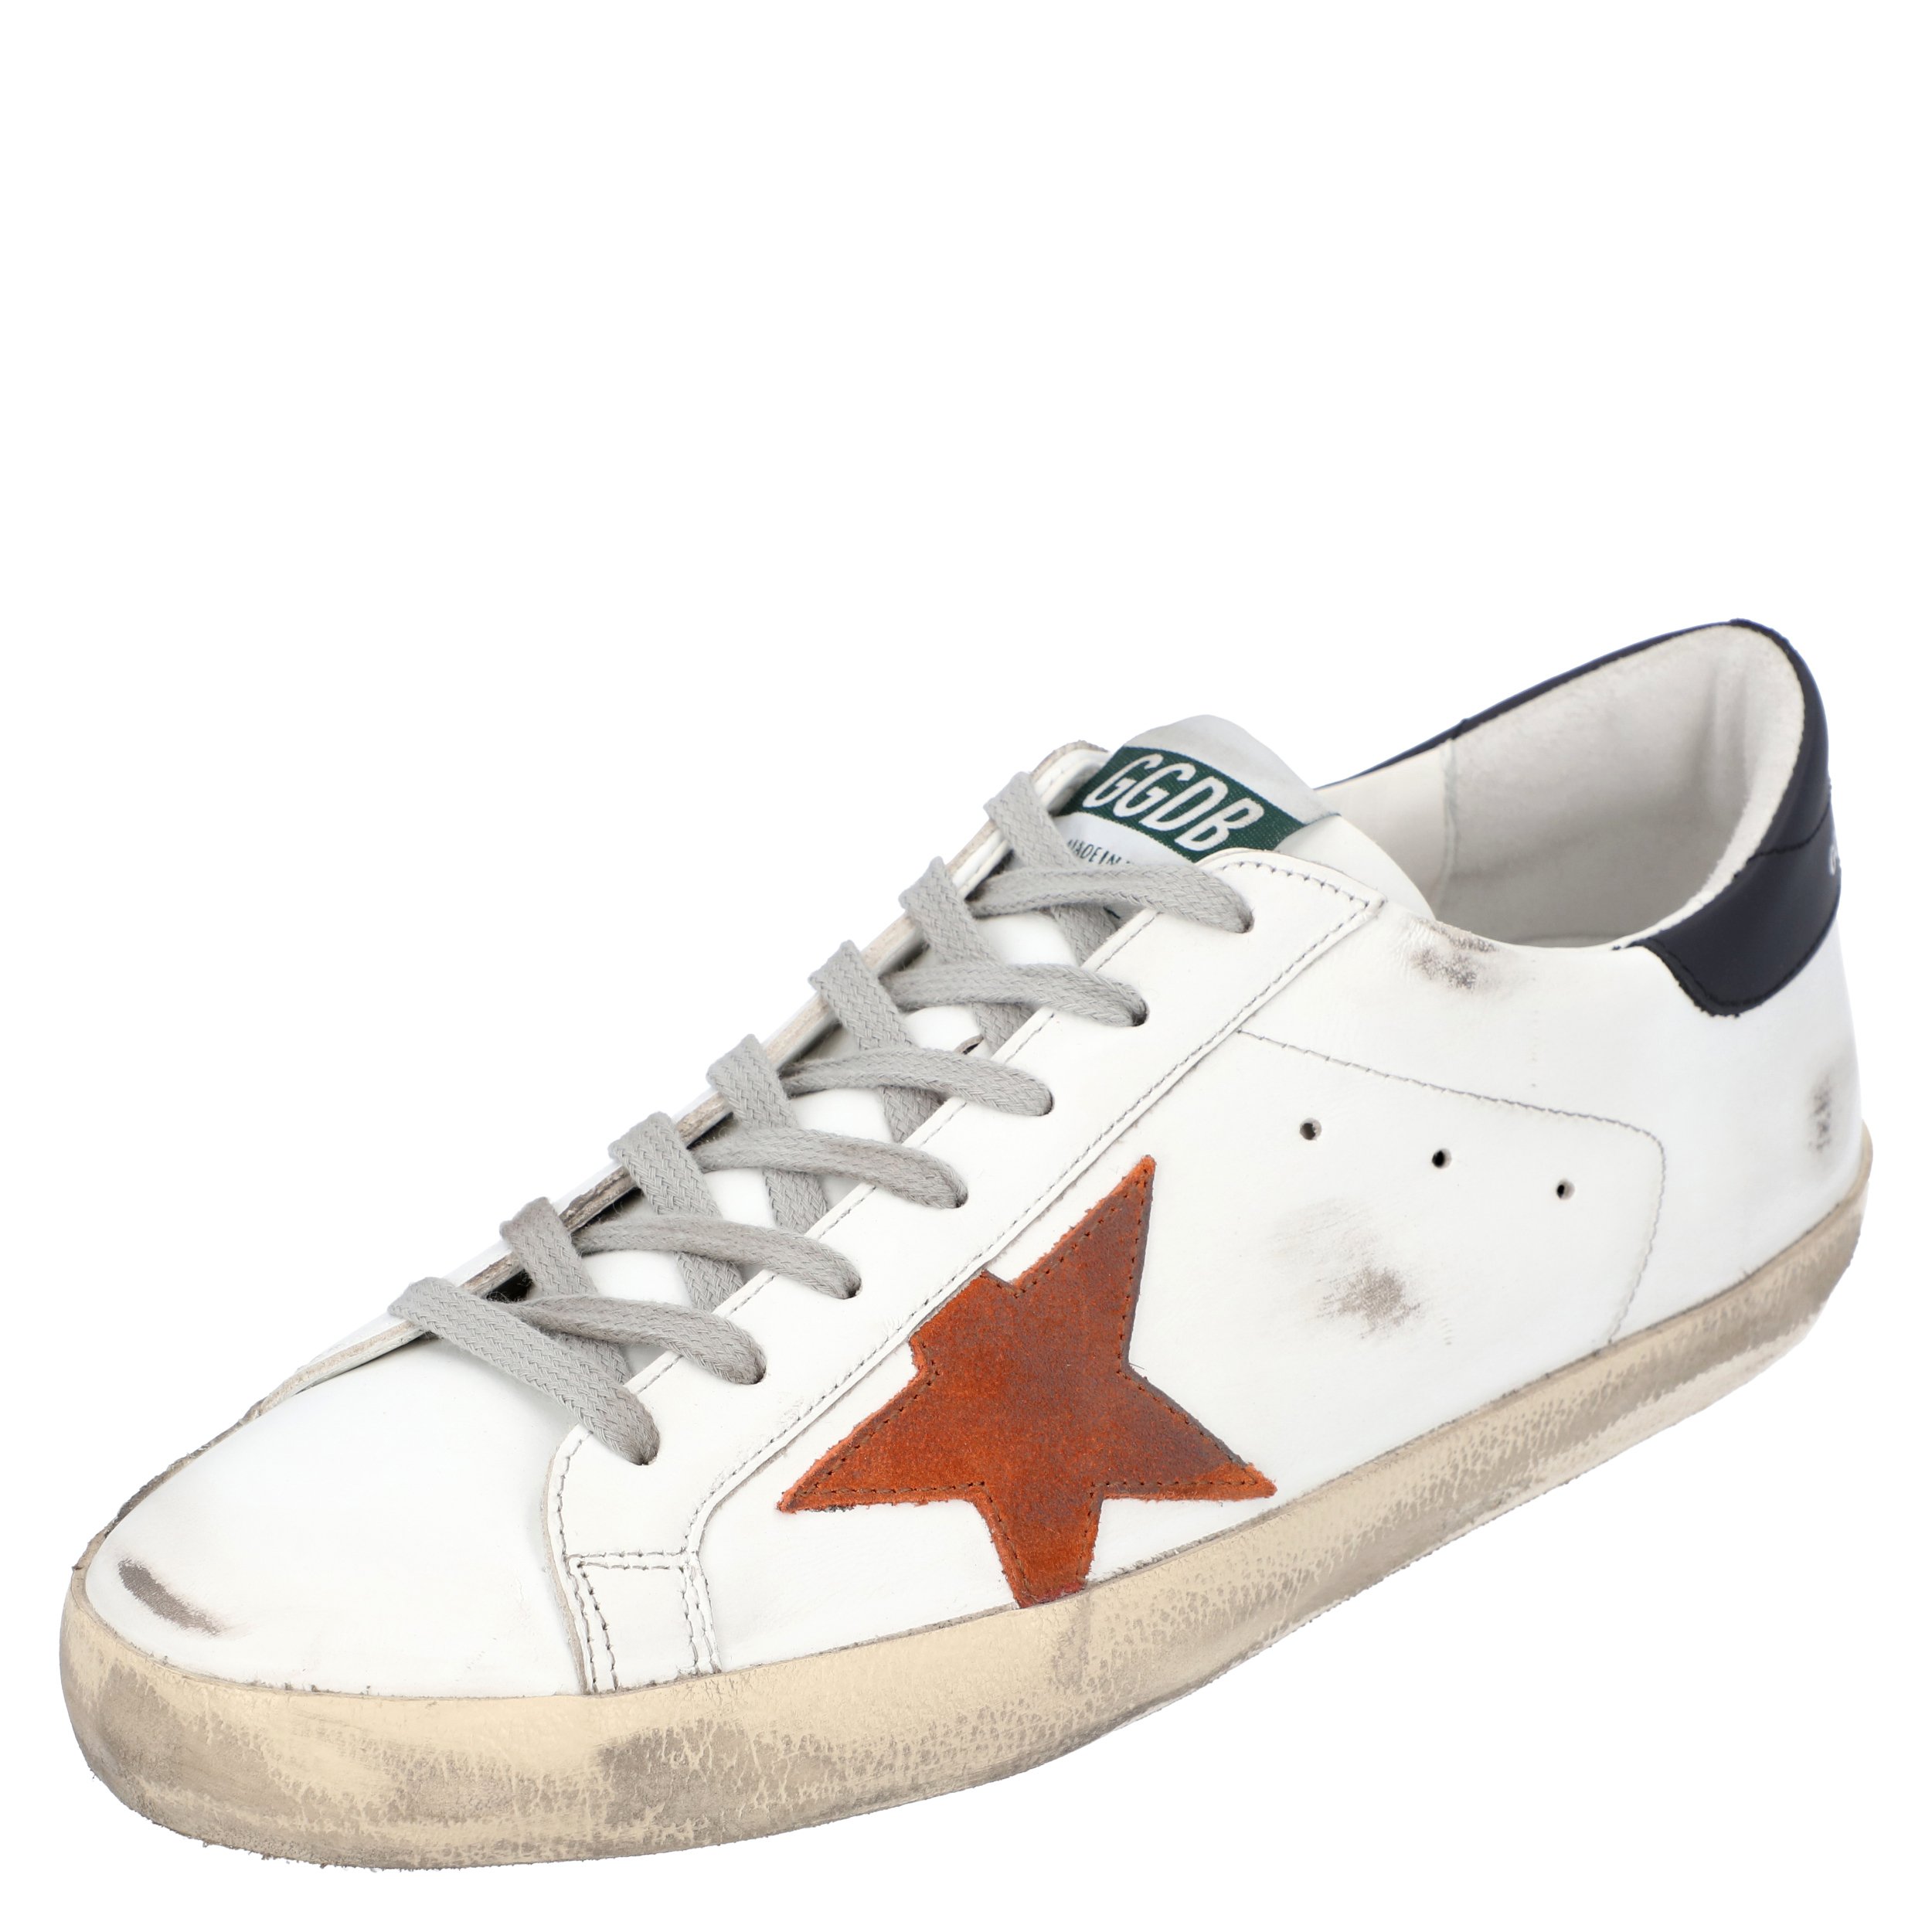 Golden Goose White / Black / Red Leather Superstar Sneakers Size EU 41